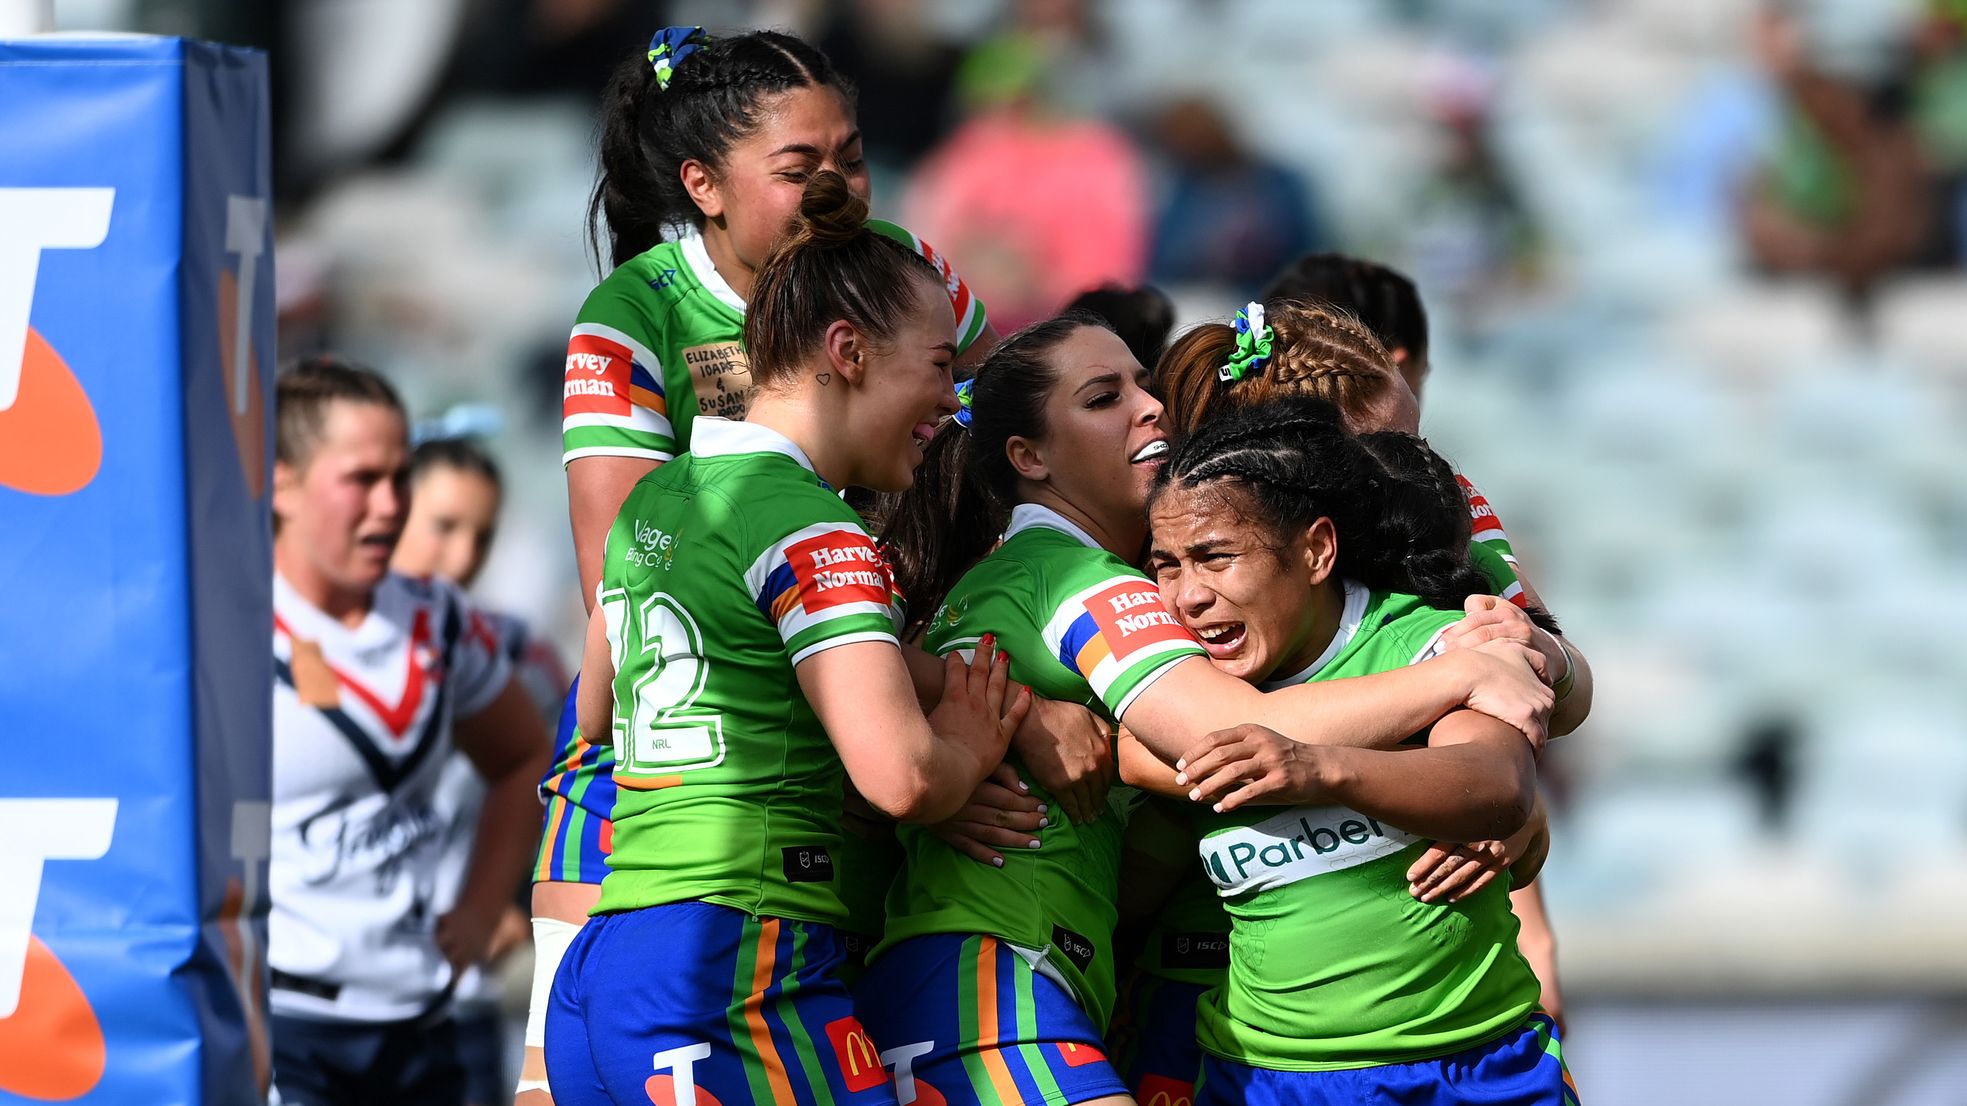 NRLW R2 Canberra Raiders v Sydney Roosters at GIO Stadium,Canberra .Picture: NRL Photos/Gregg Porteous